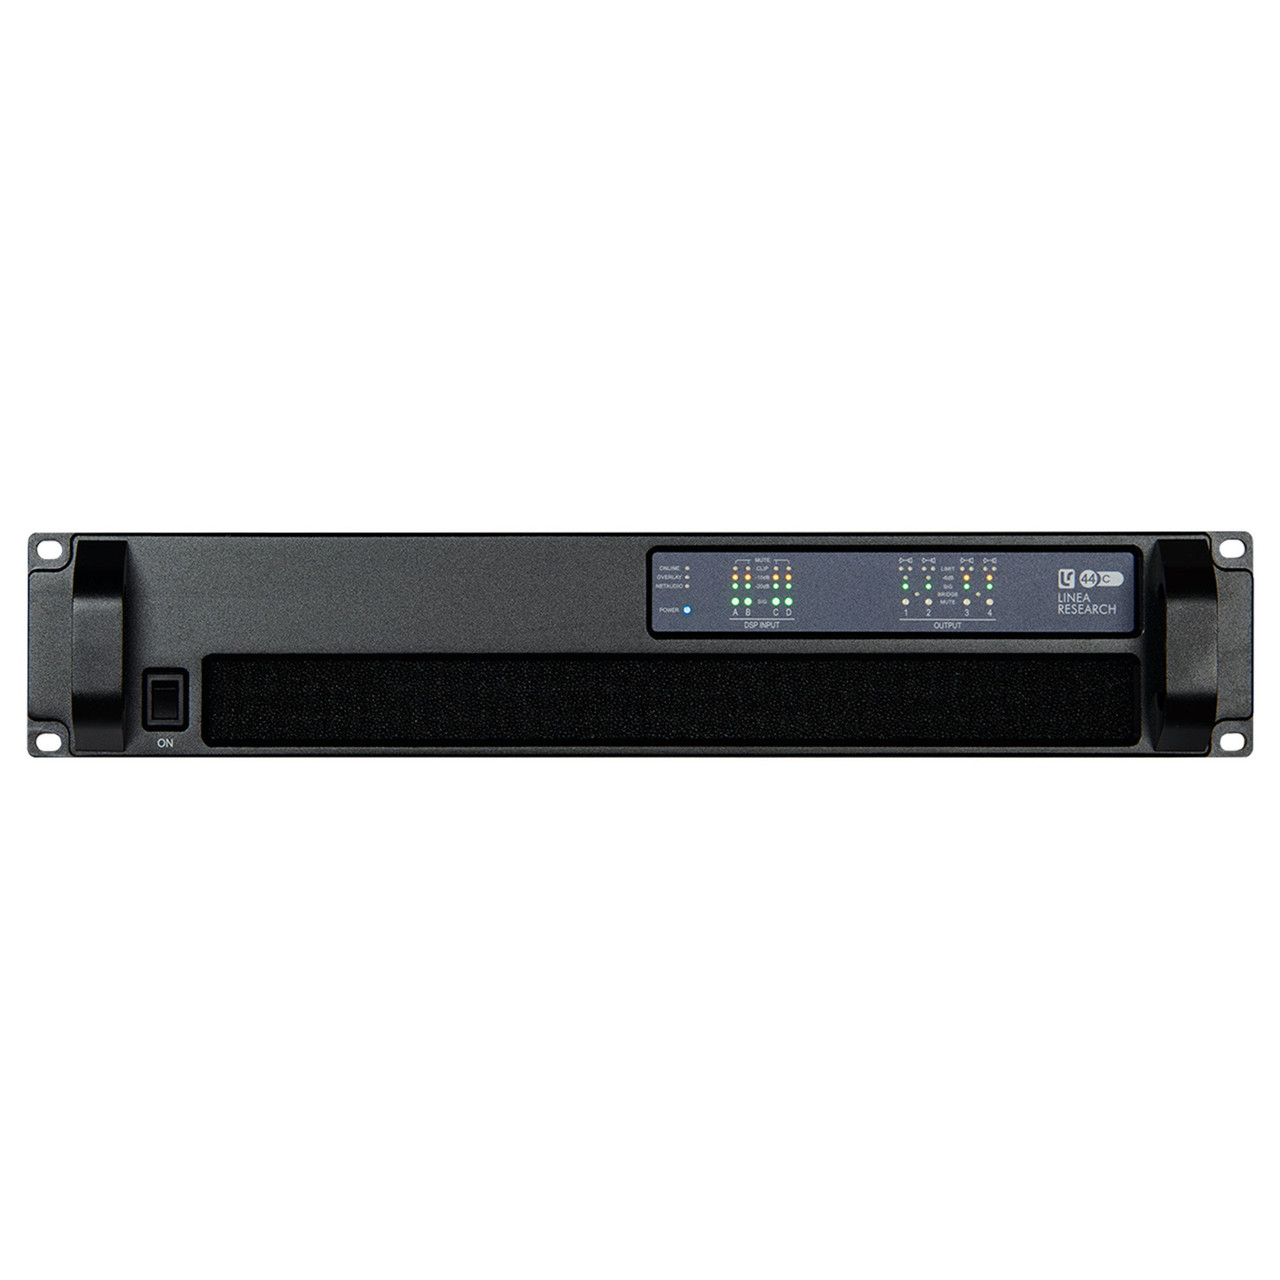 Linea Research LR-44C06 Four Channel Installation Amplifier 6,000 Watts RMS